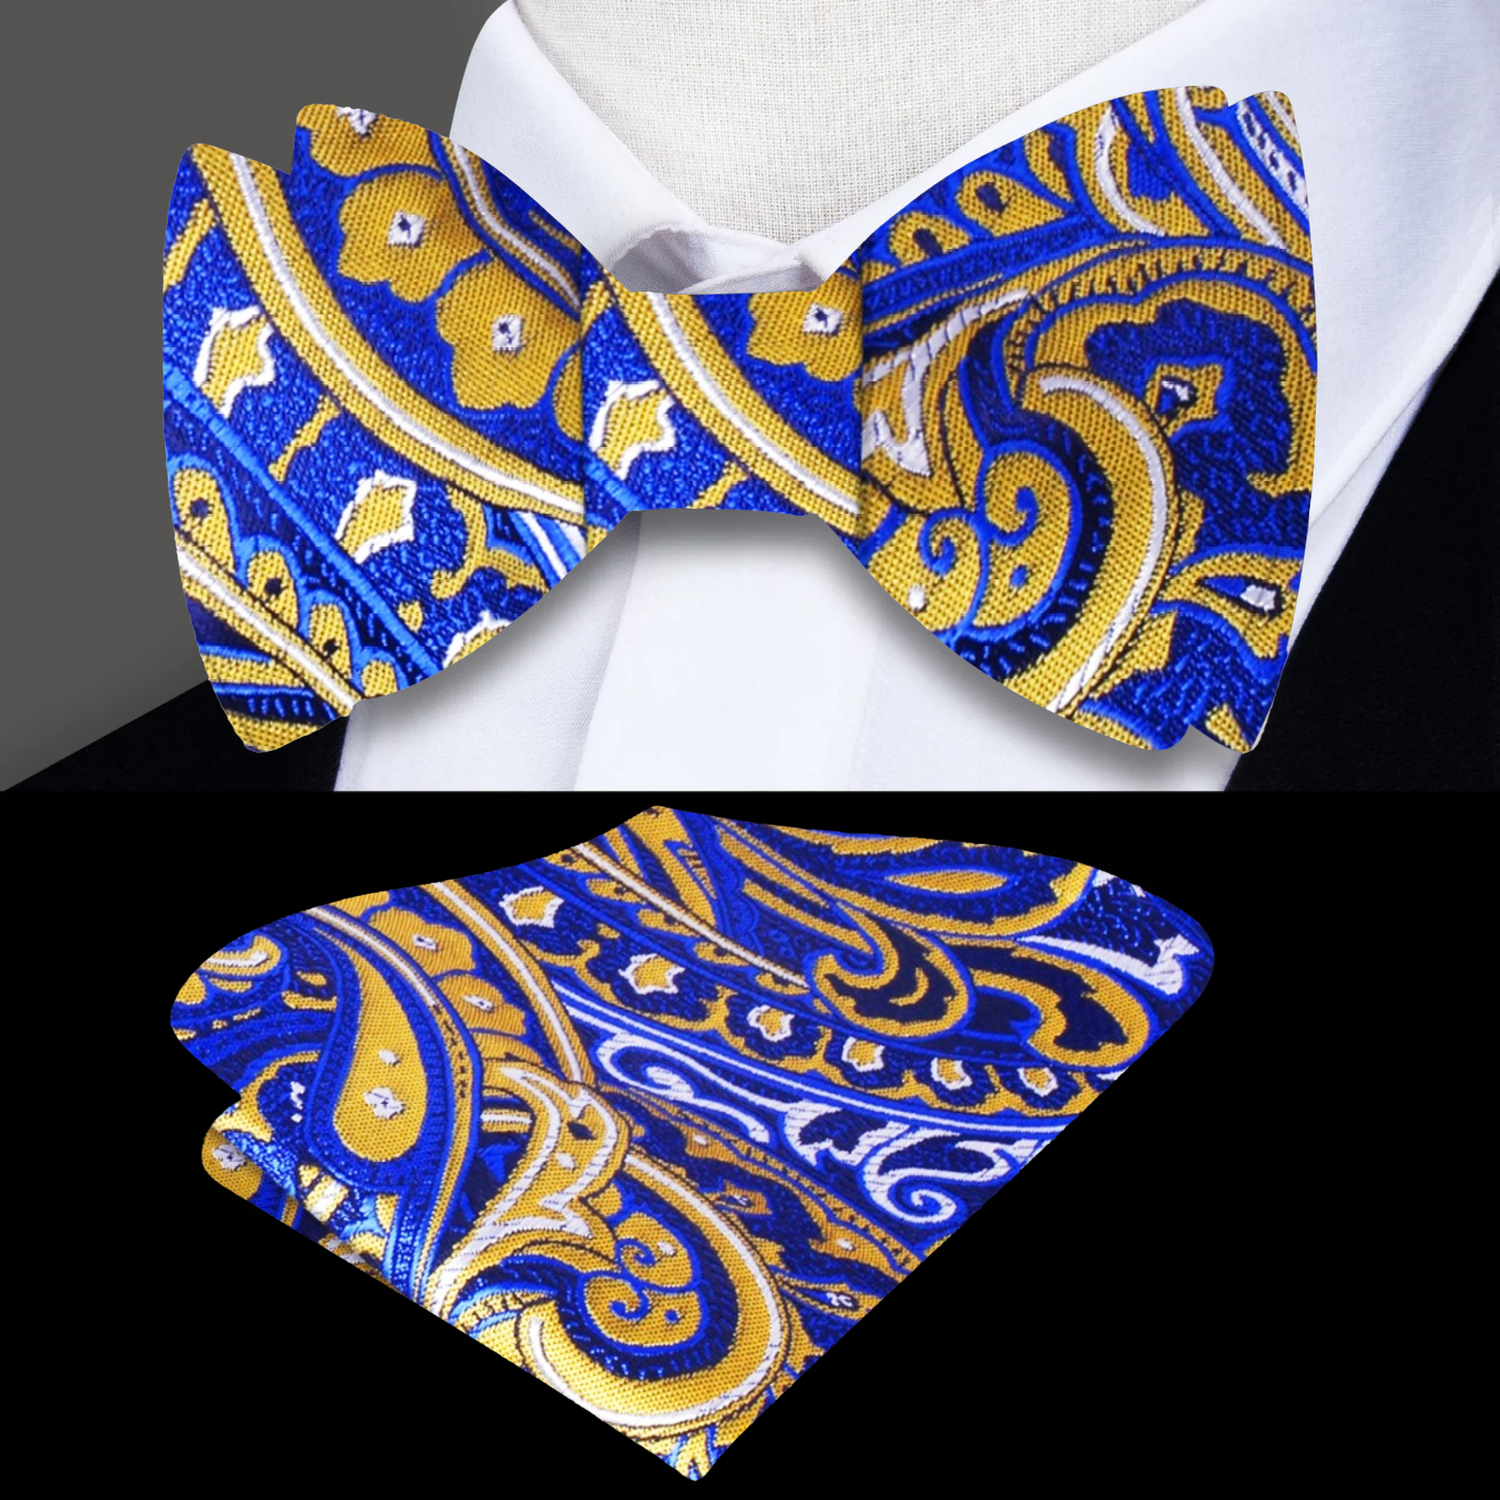 A Blue, Yellow Ornate Paisley Pattern Silk Self Tie Bow Tie, Pocket Square